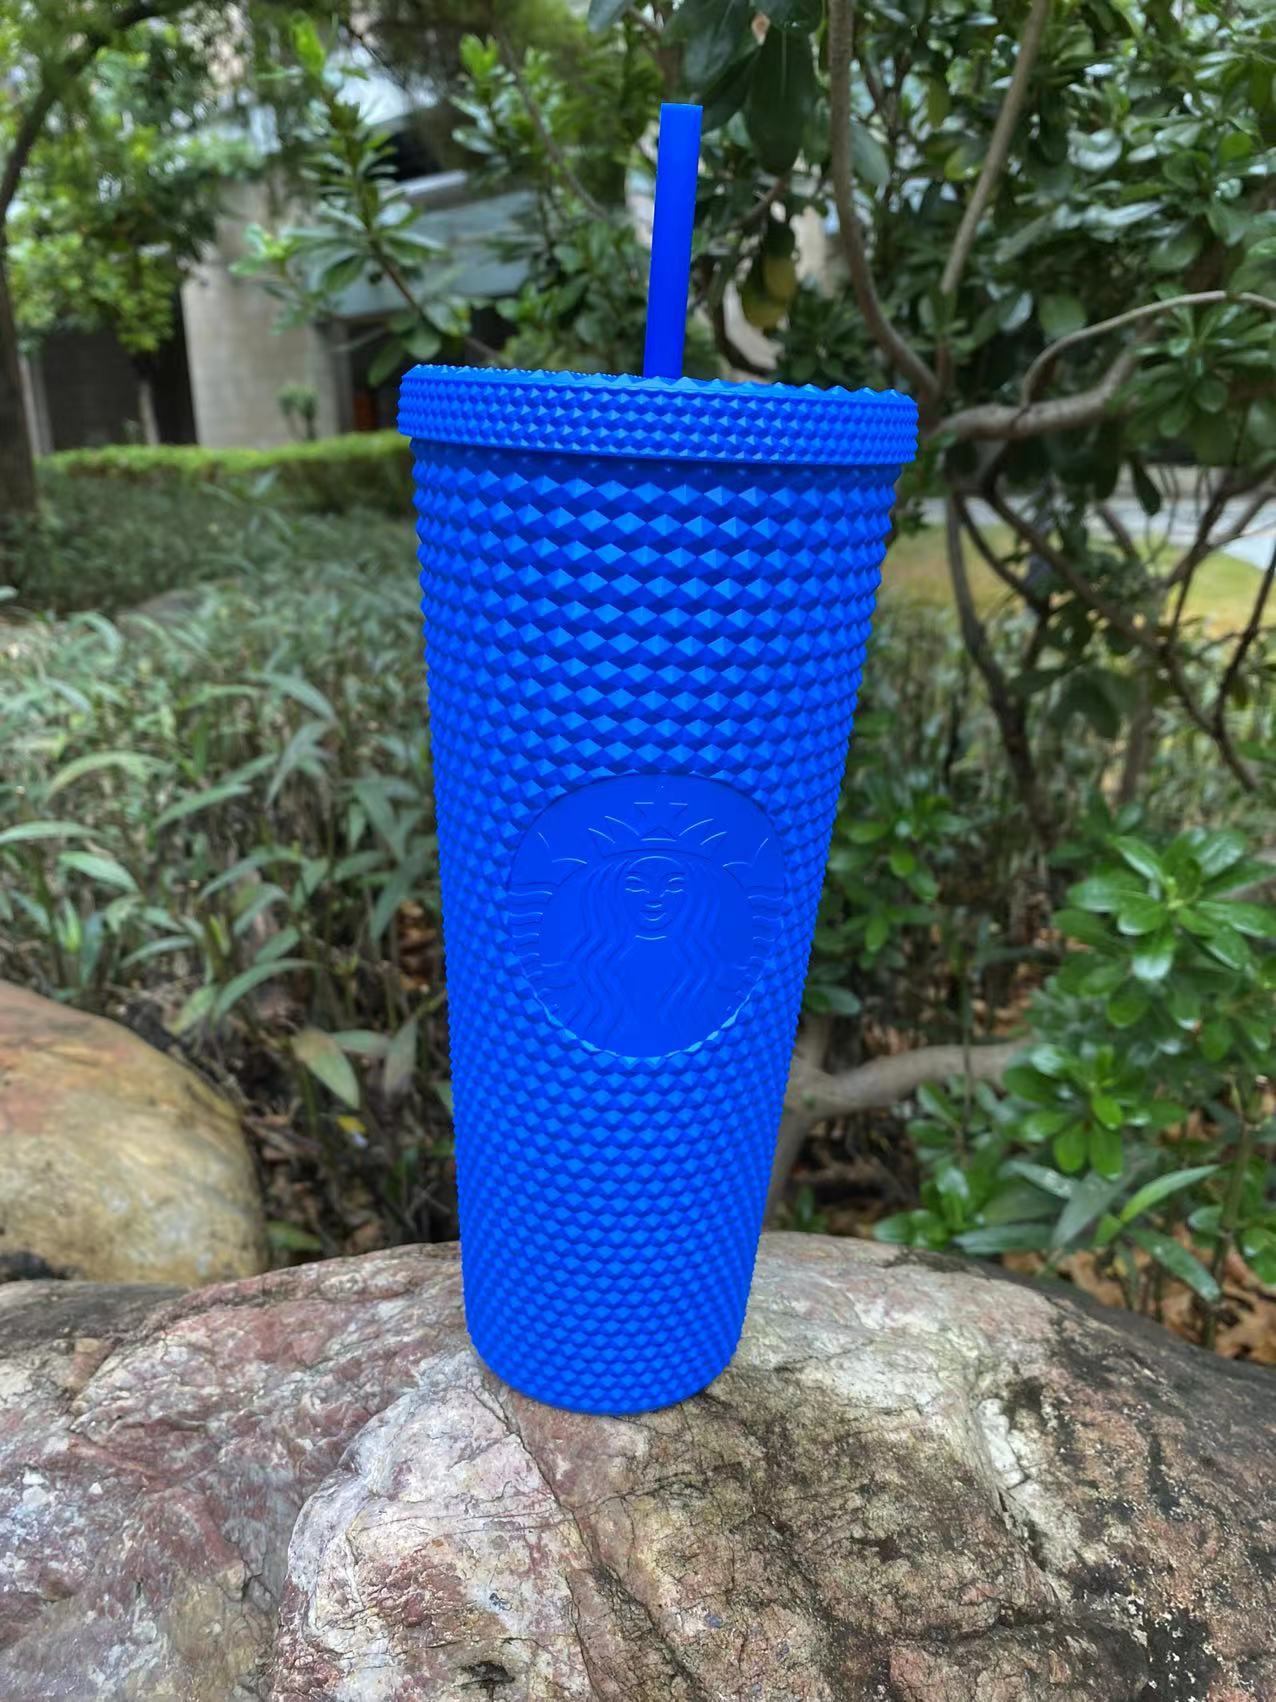 2022 Christmas China Klein Blue Studded 24oz Tumbler Straw Cup